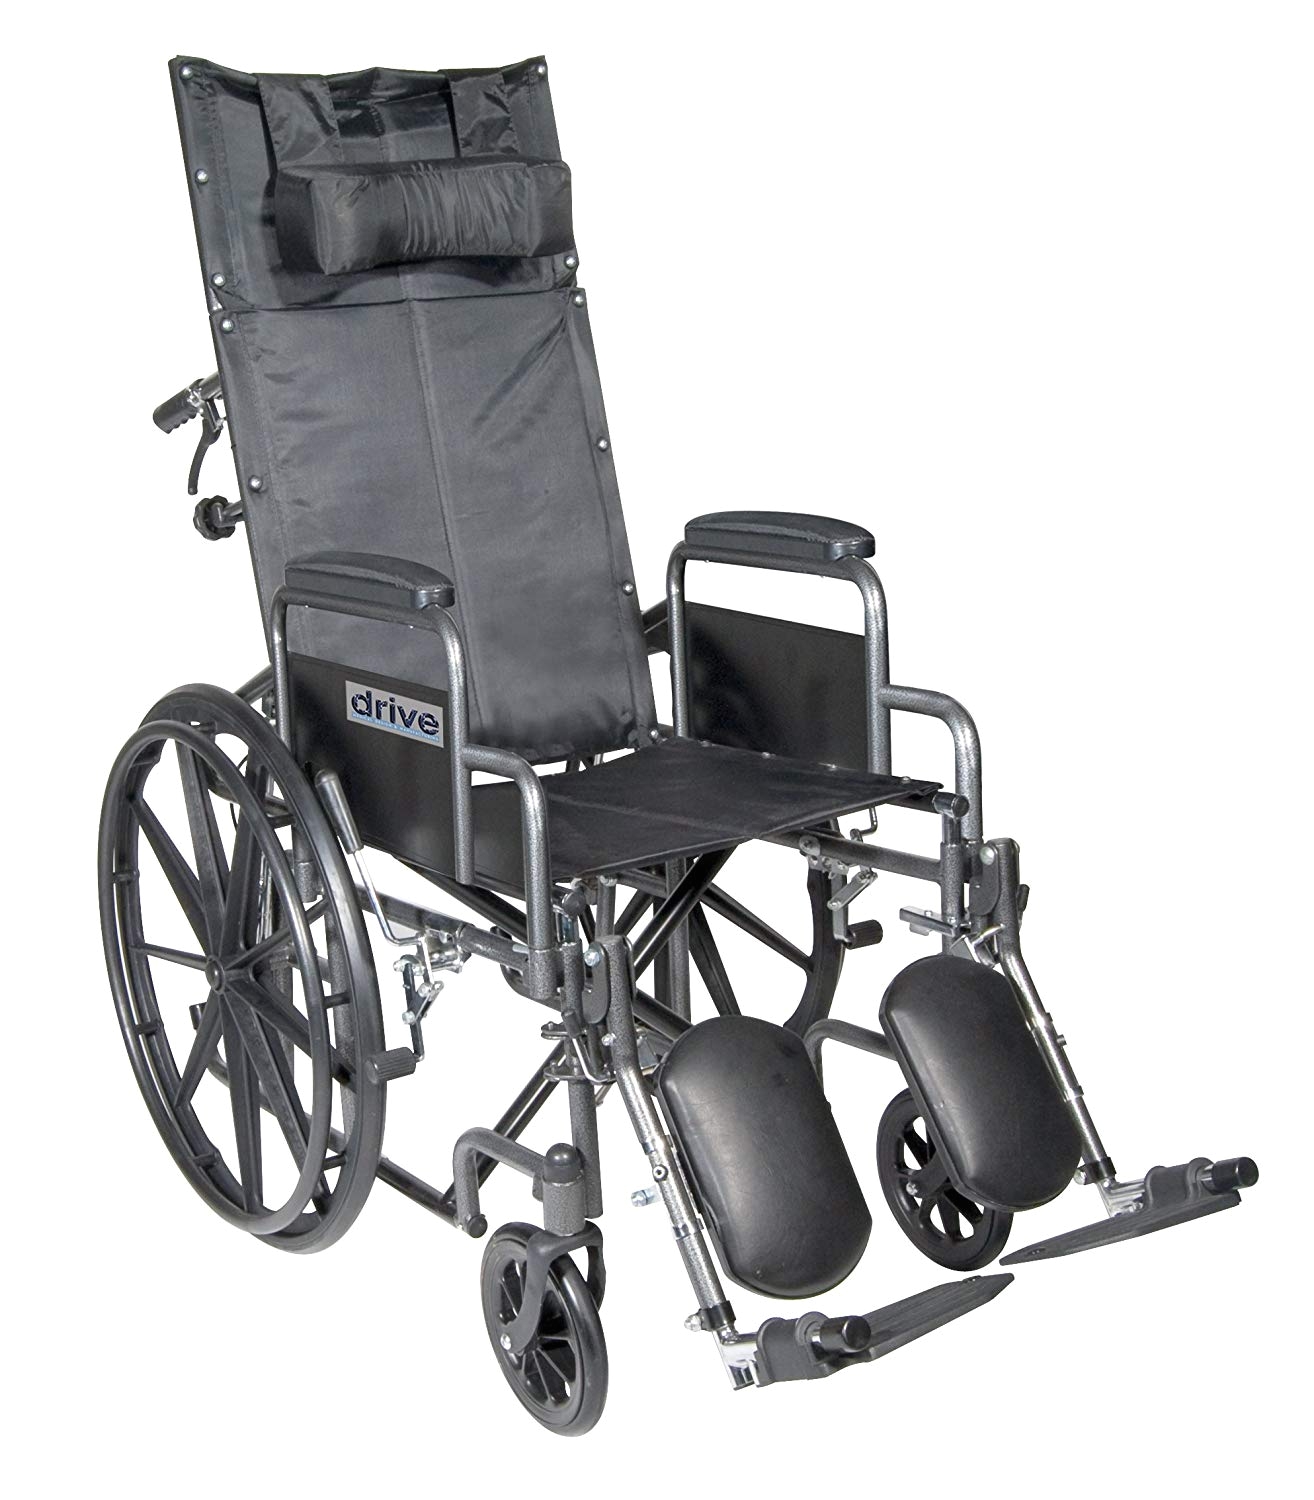 Medical Transport Chair Walmart Amazon Com Drive Medical Silver Sport Reclining Wheelchair with